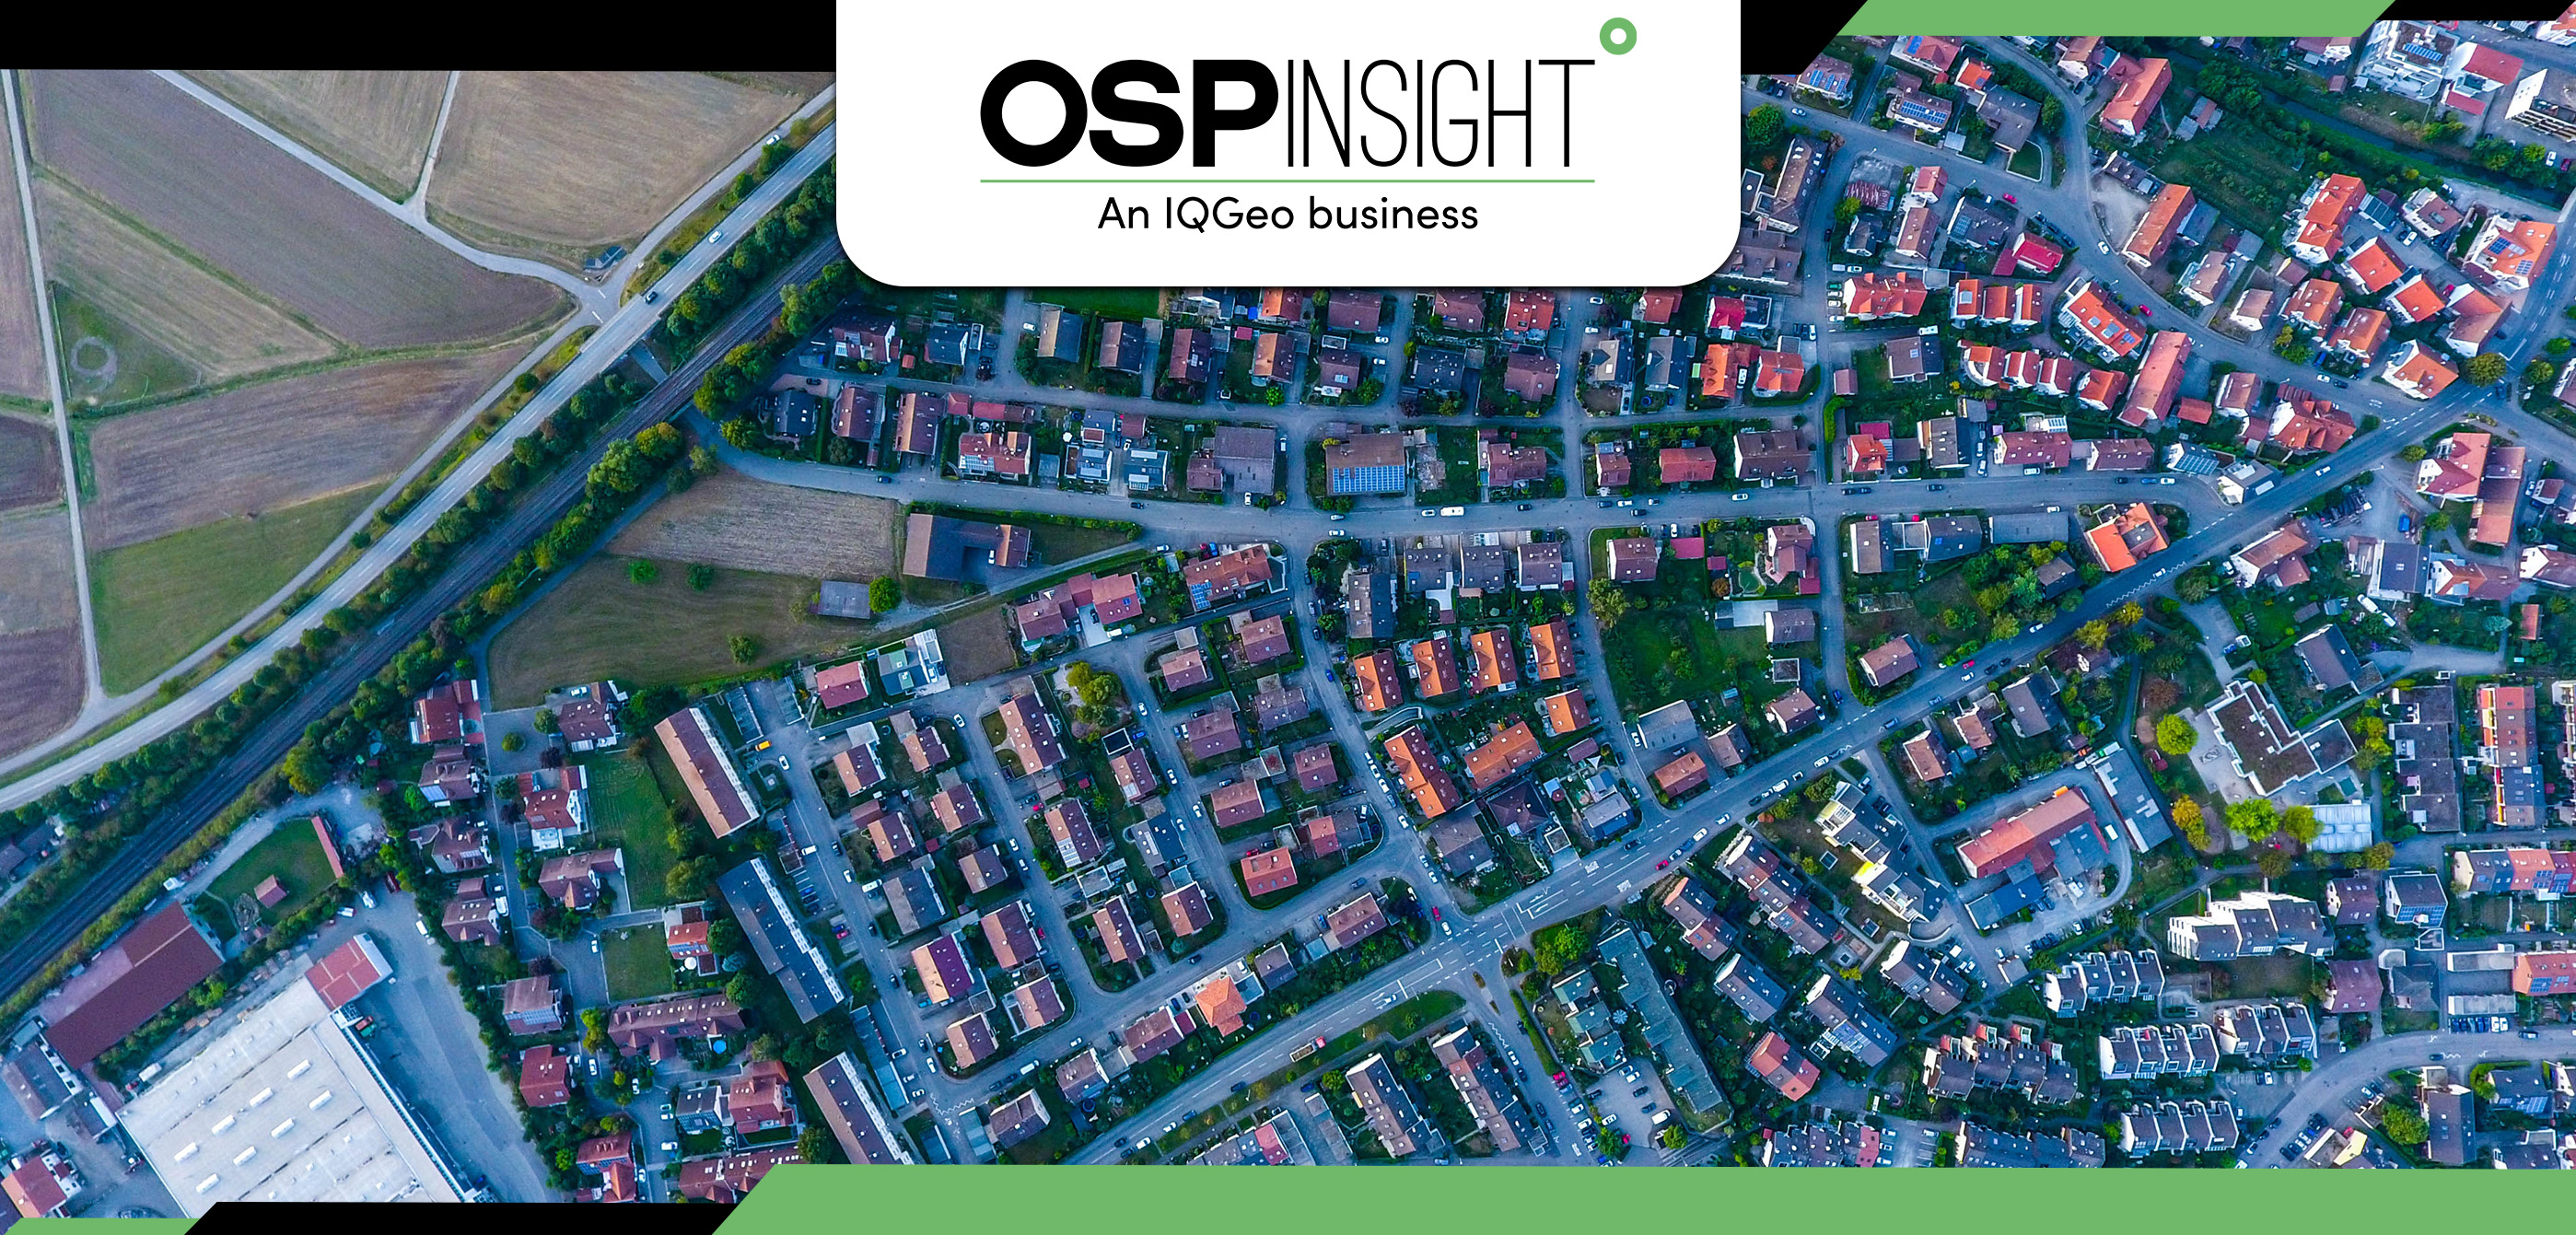 OSPI_Blog_A brief rundown of today’s leading GIS platforms_featured image_23Sep22